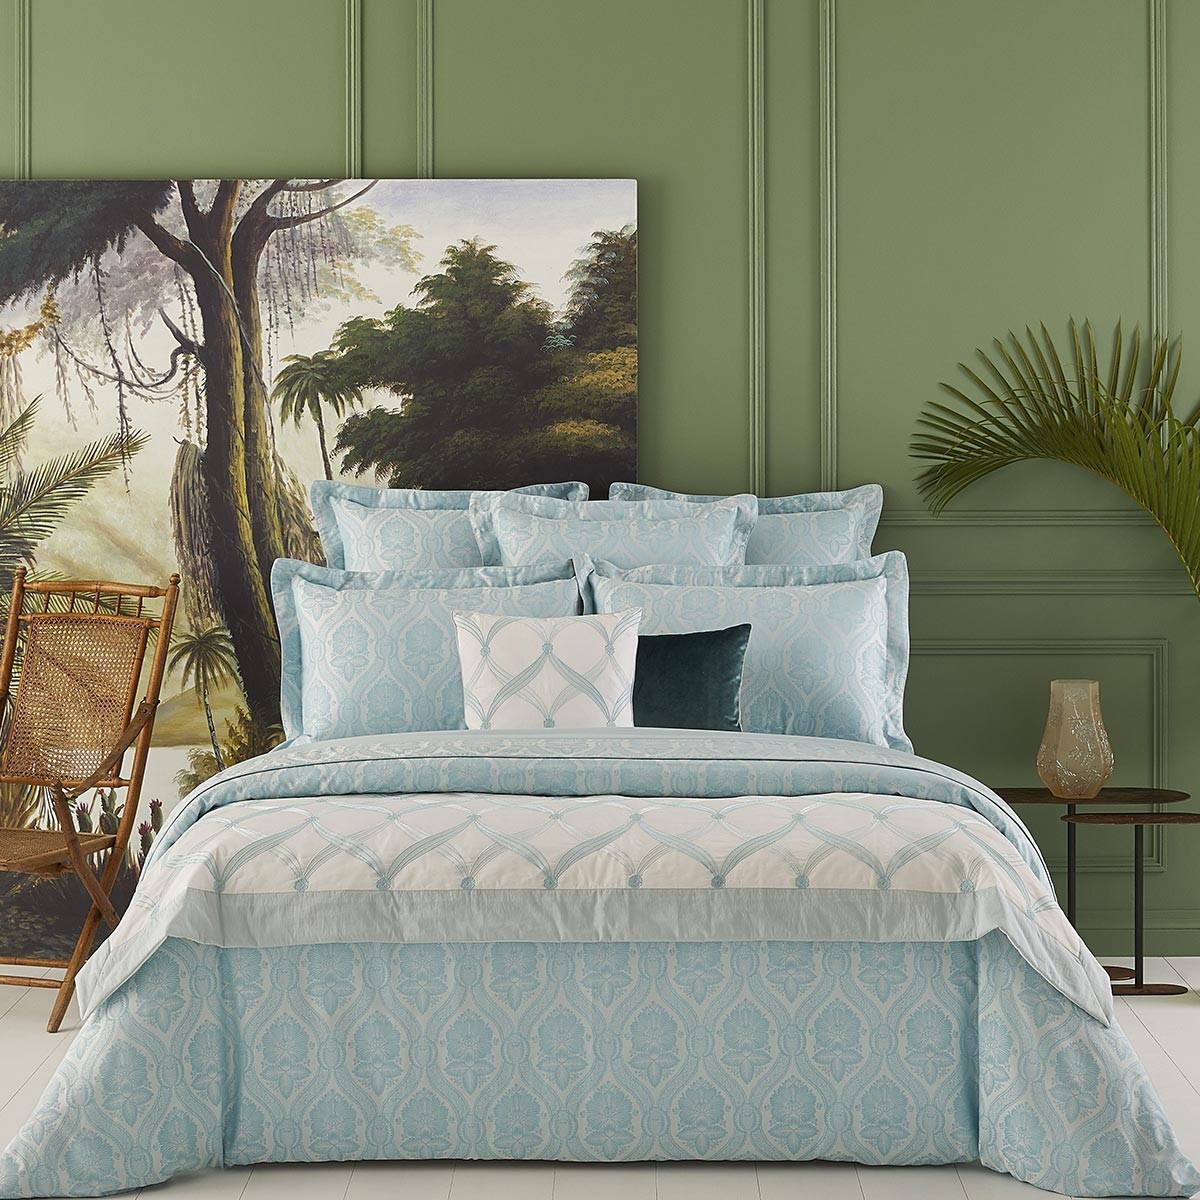 Yves Delorme Collection Bed Nil Tranquility Bleu Embrace 